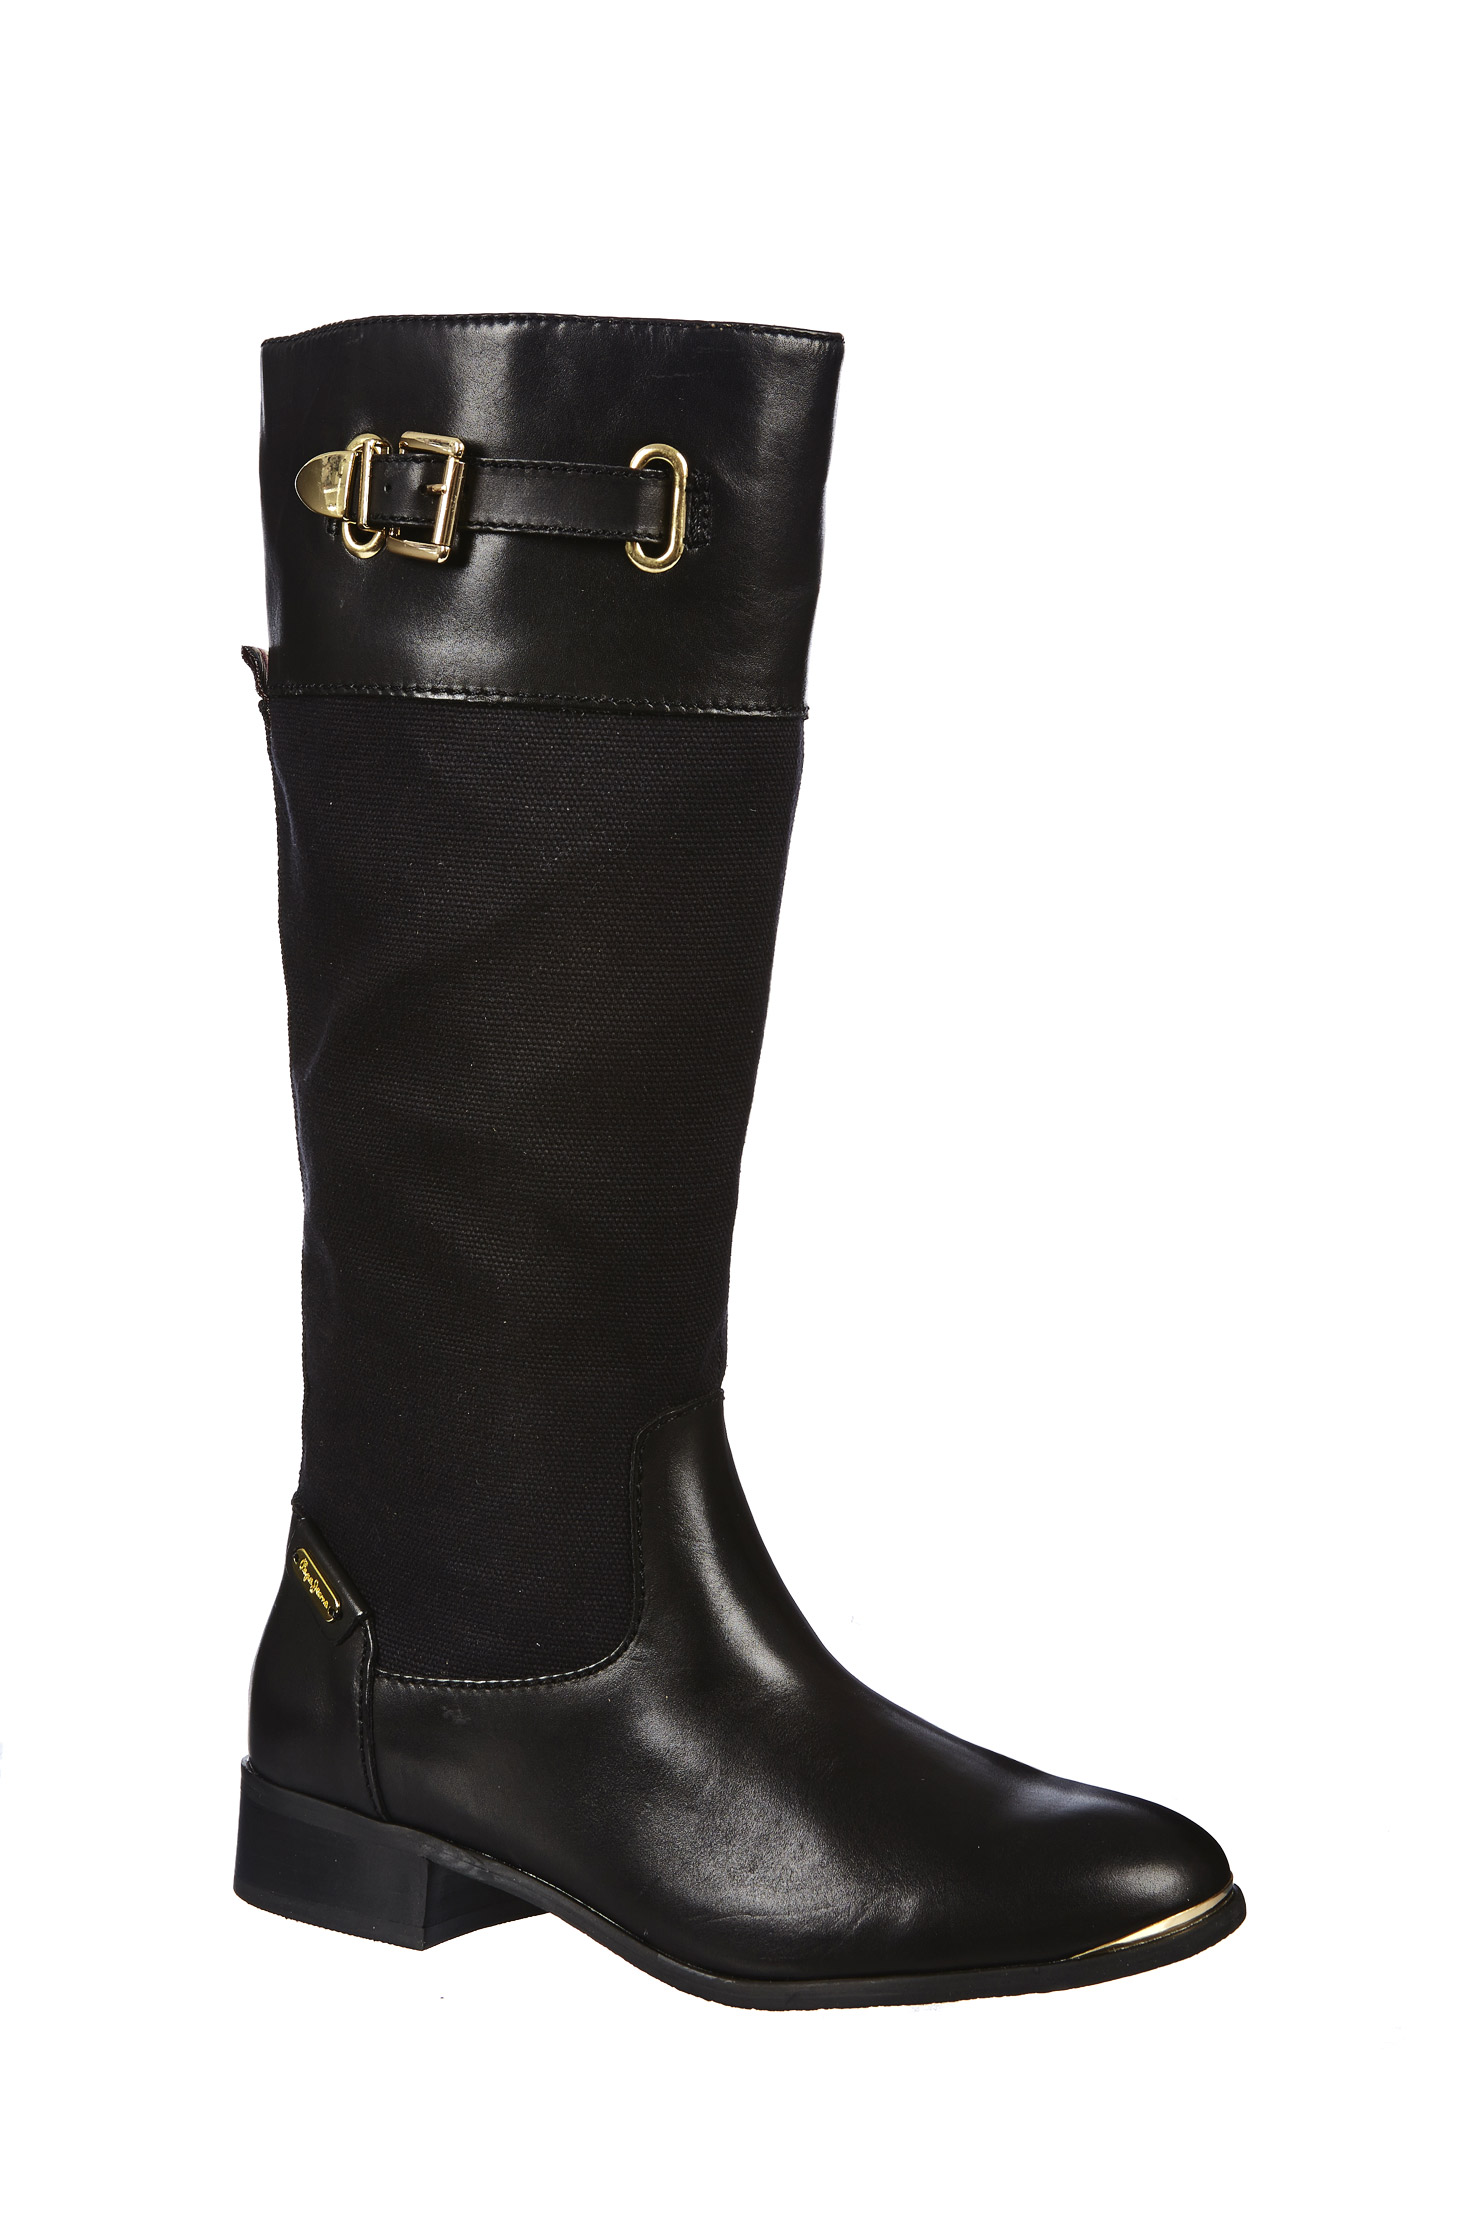 Pepe Jeans Boots Shoes in Black | Lyst